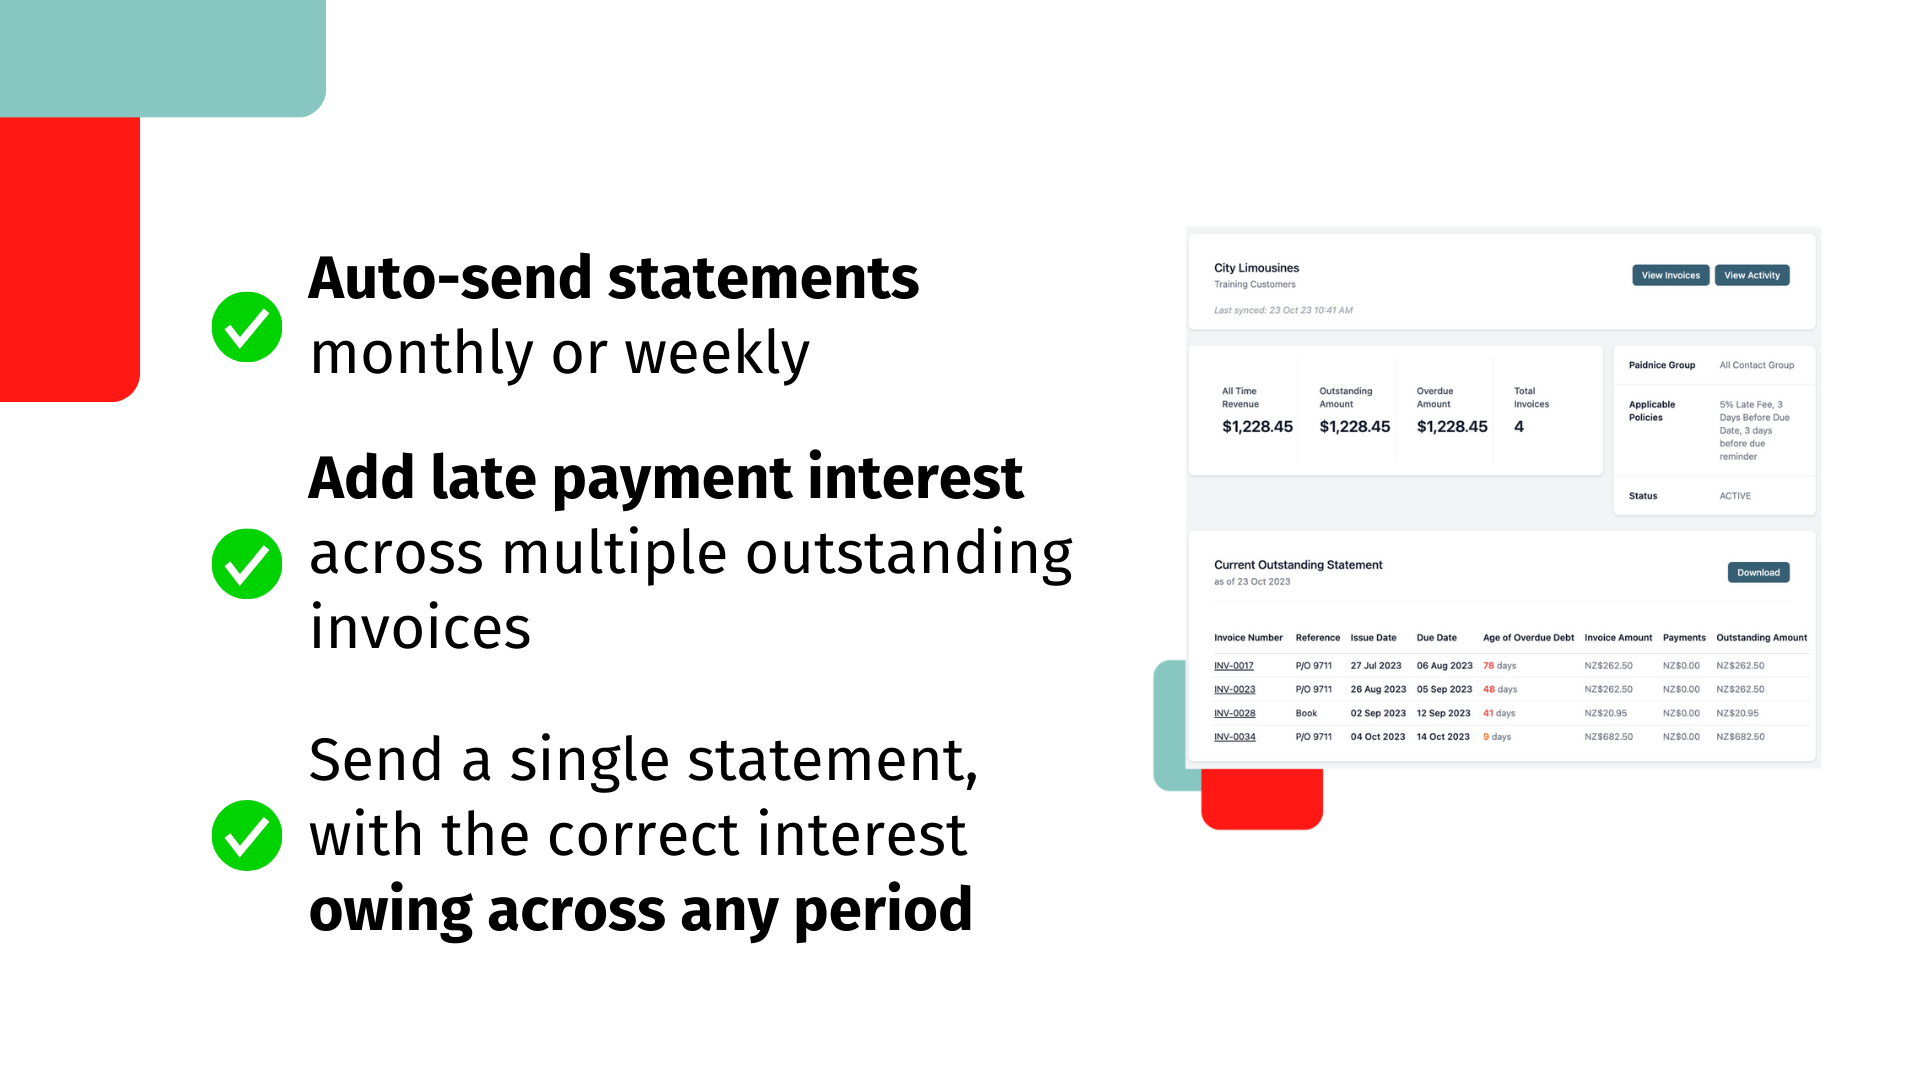 Auto-send statements monthly or weekly